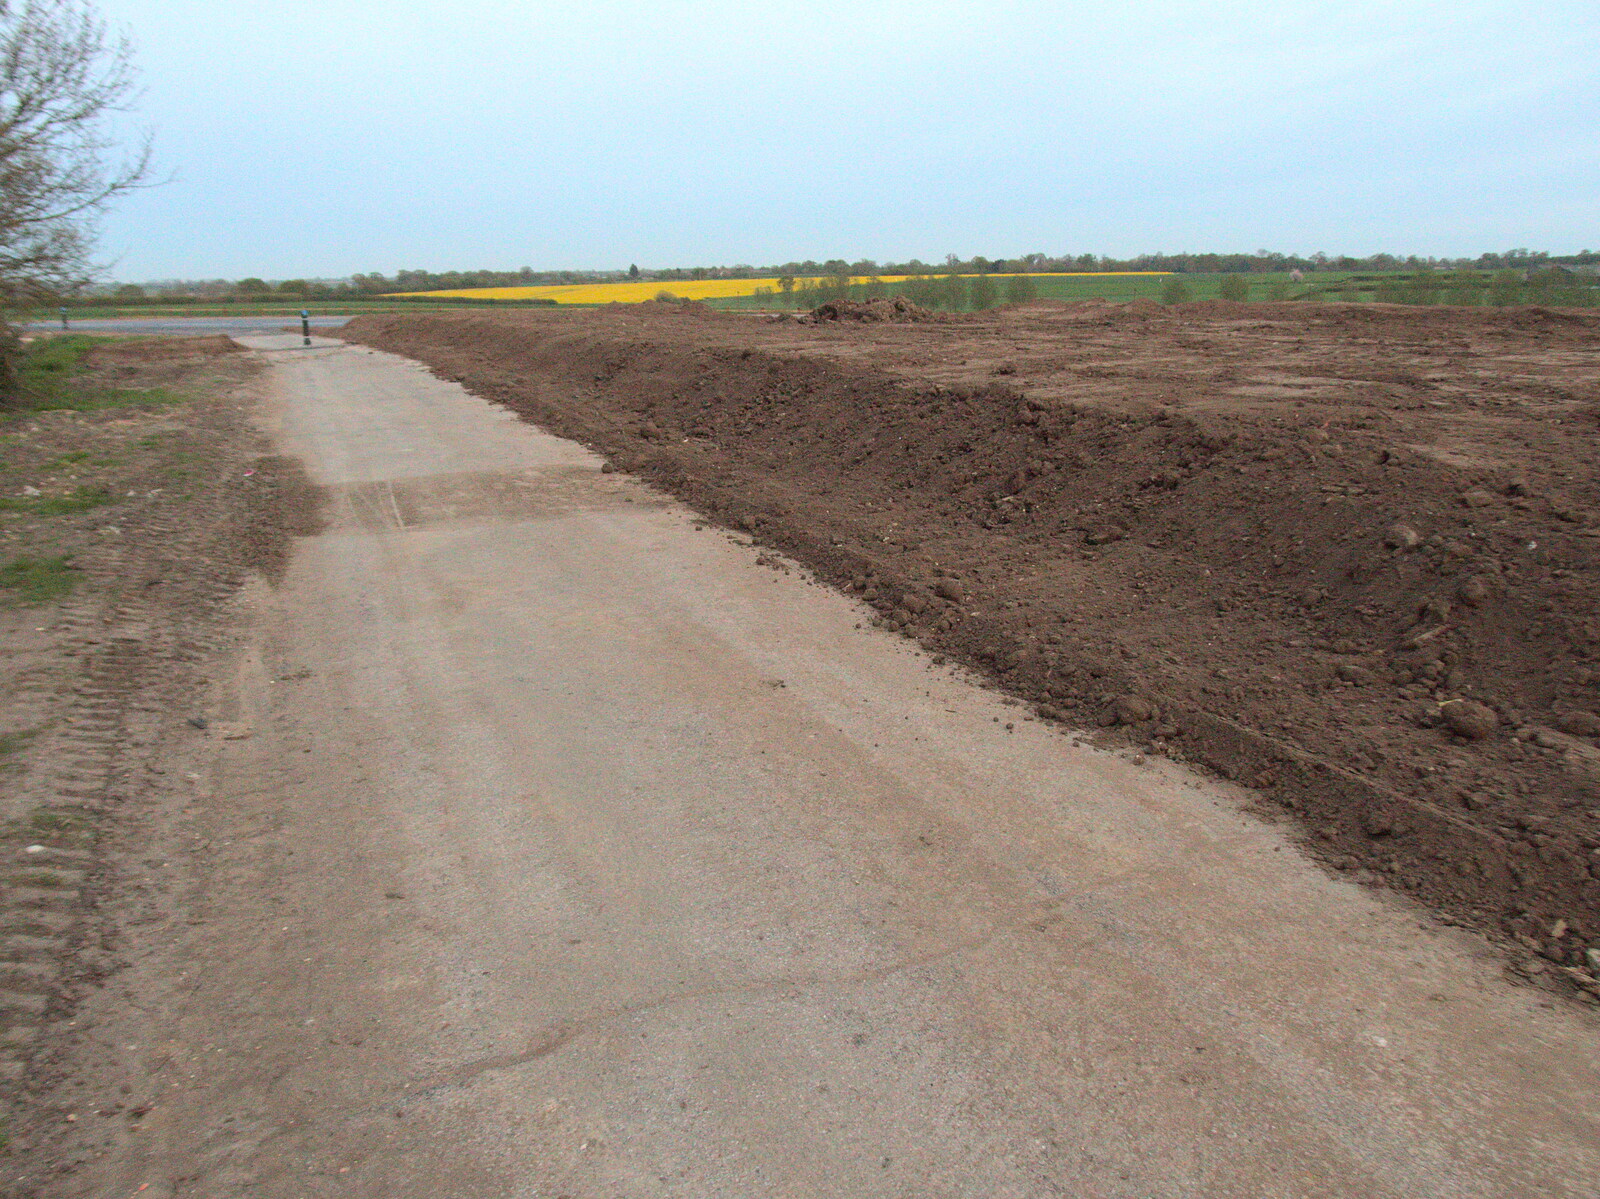 The old road becomes a new cycle path from The BSCC at the King's Head, Brockdish, Norfolk - 13th May 2021